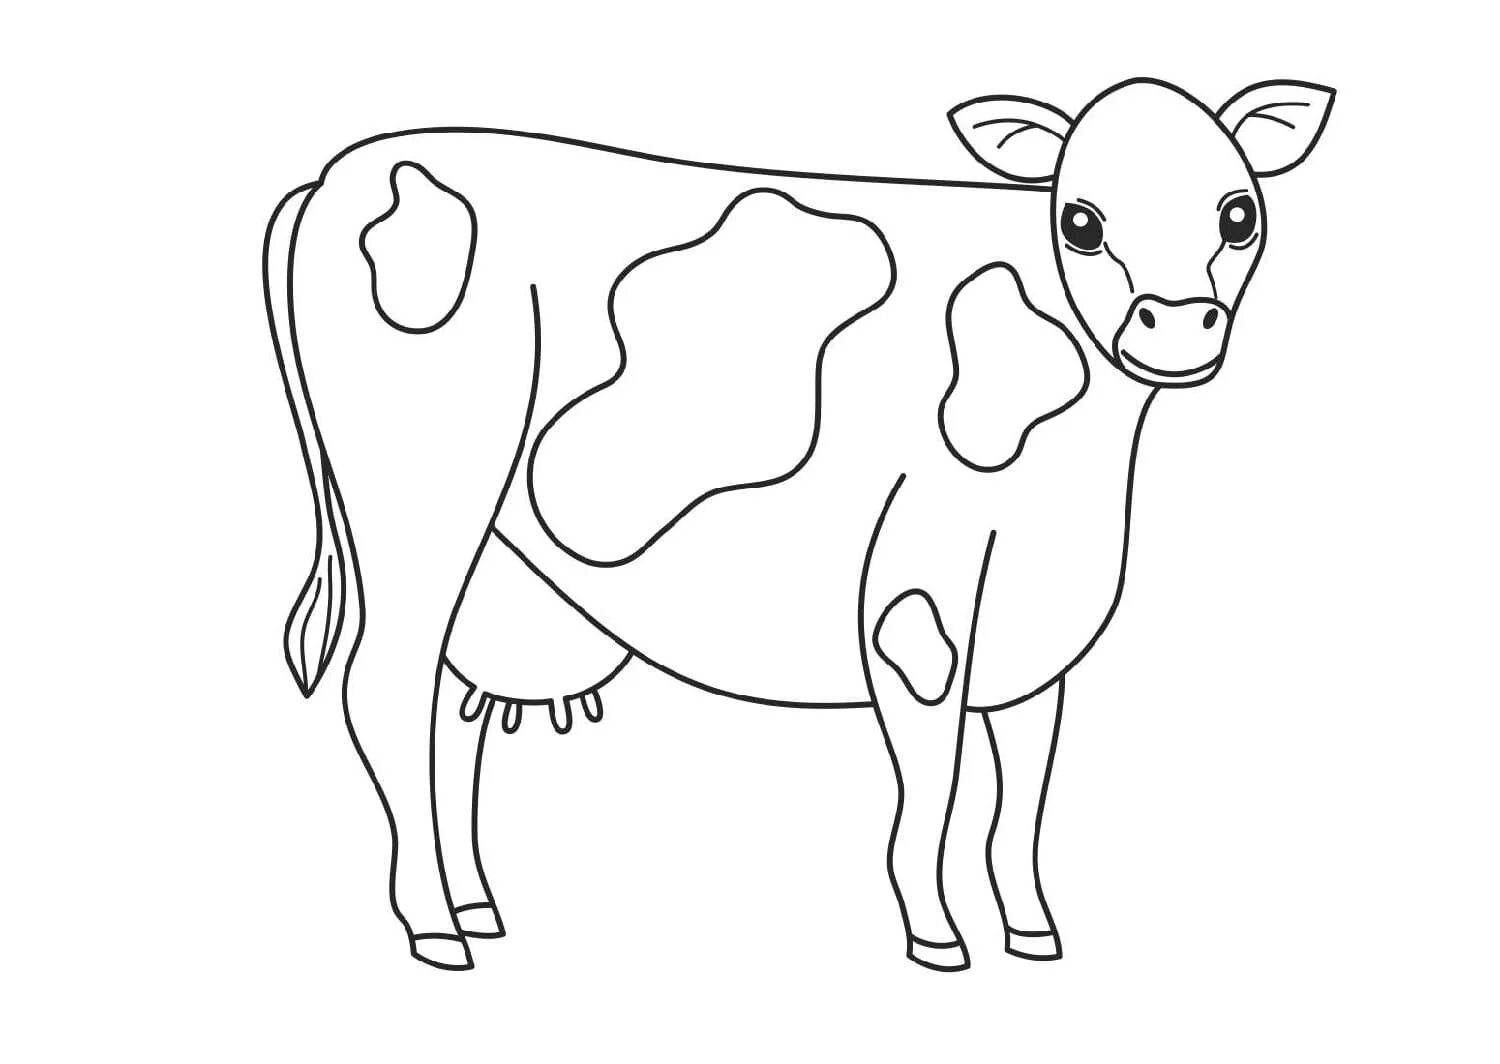 Cow coloring page for kids 2 3 years old